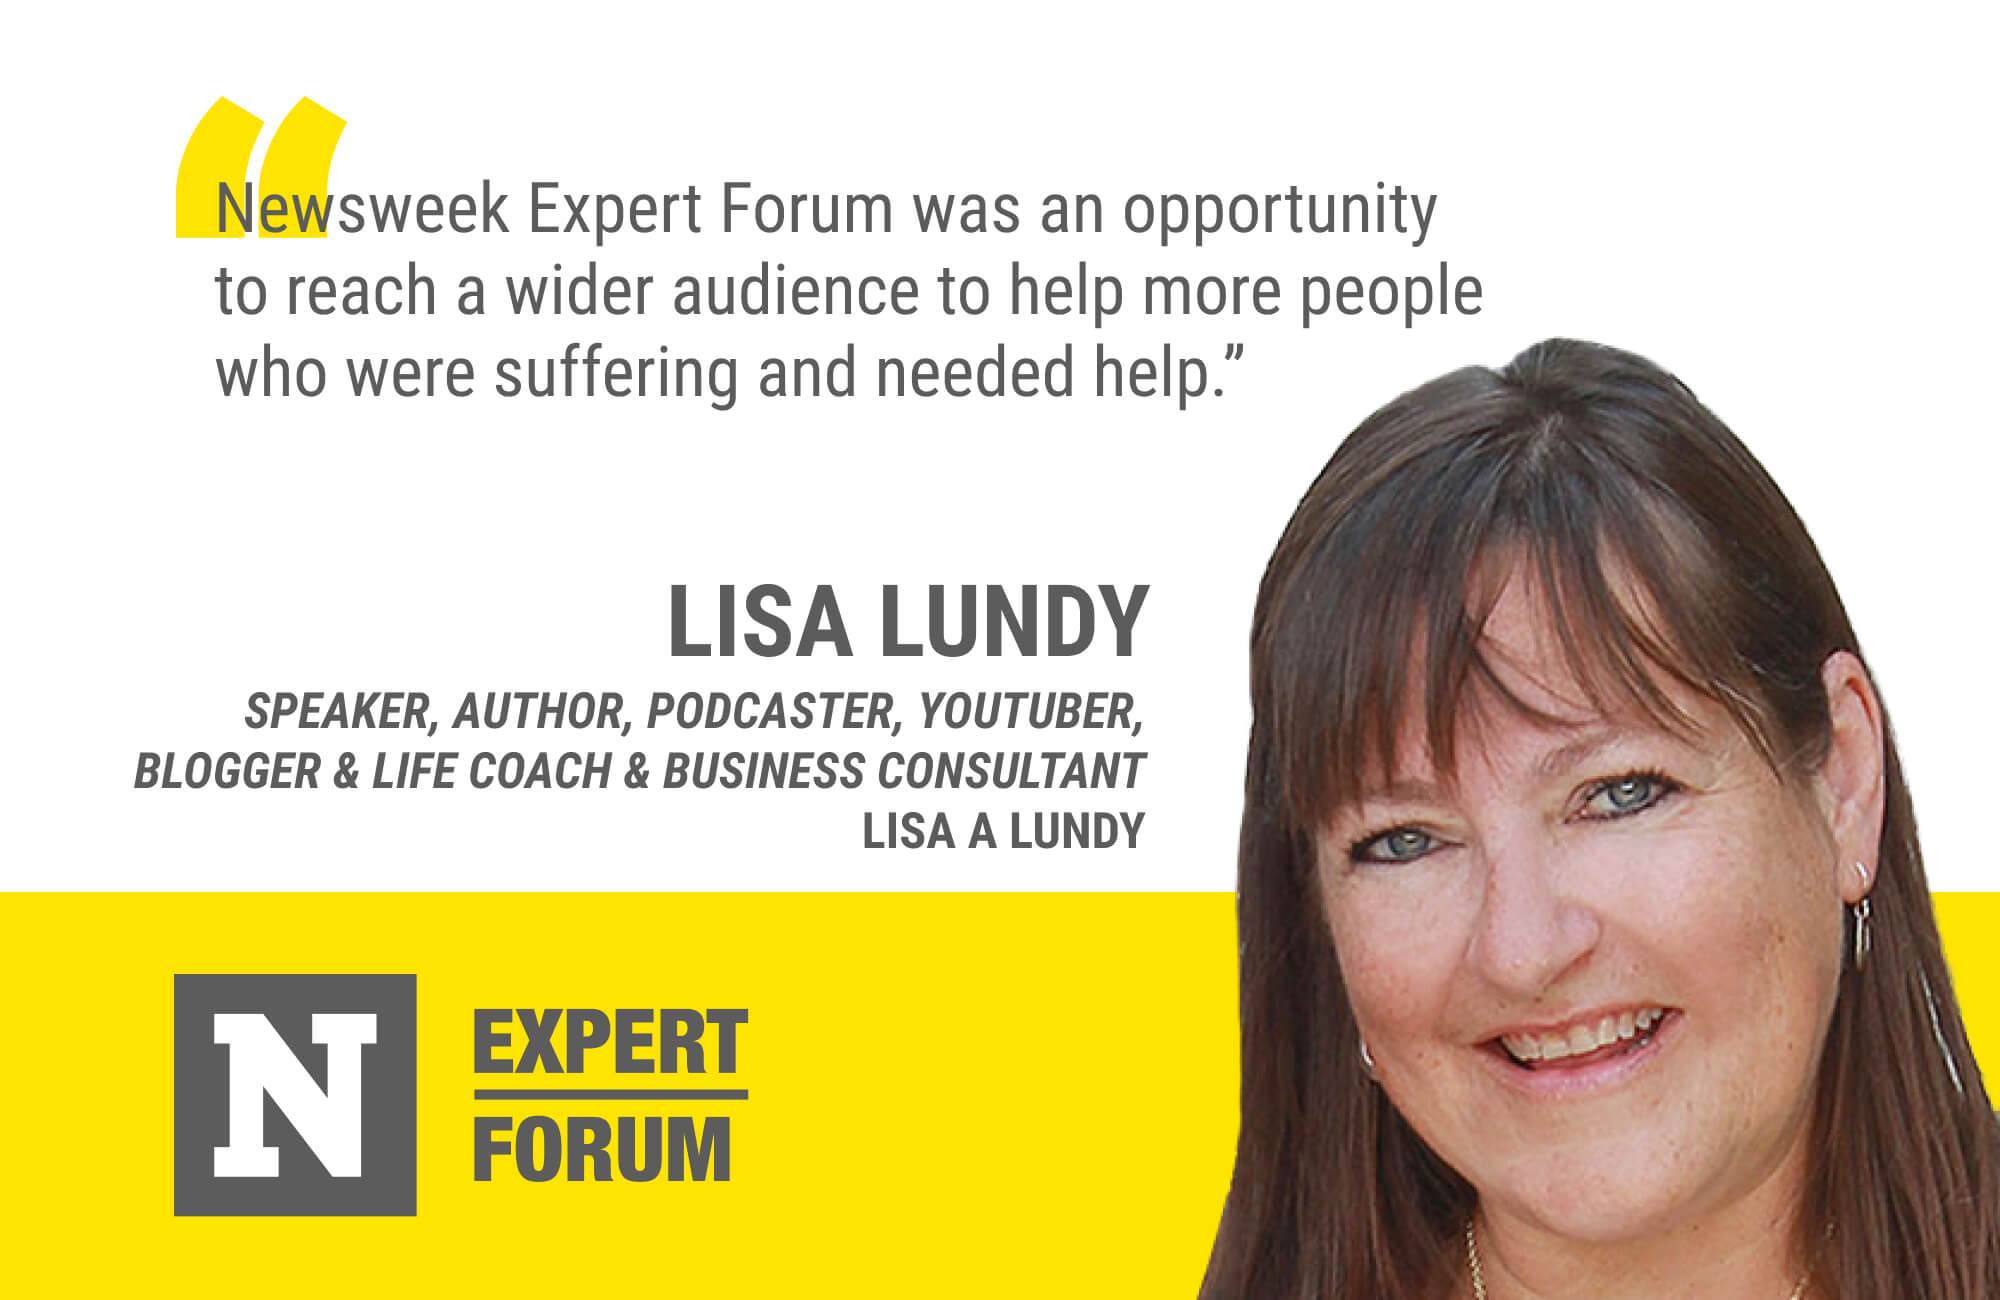 Lisa Lundy Leverages Newsweek Expert Forum to Reach and Help a Broader Audience